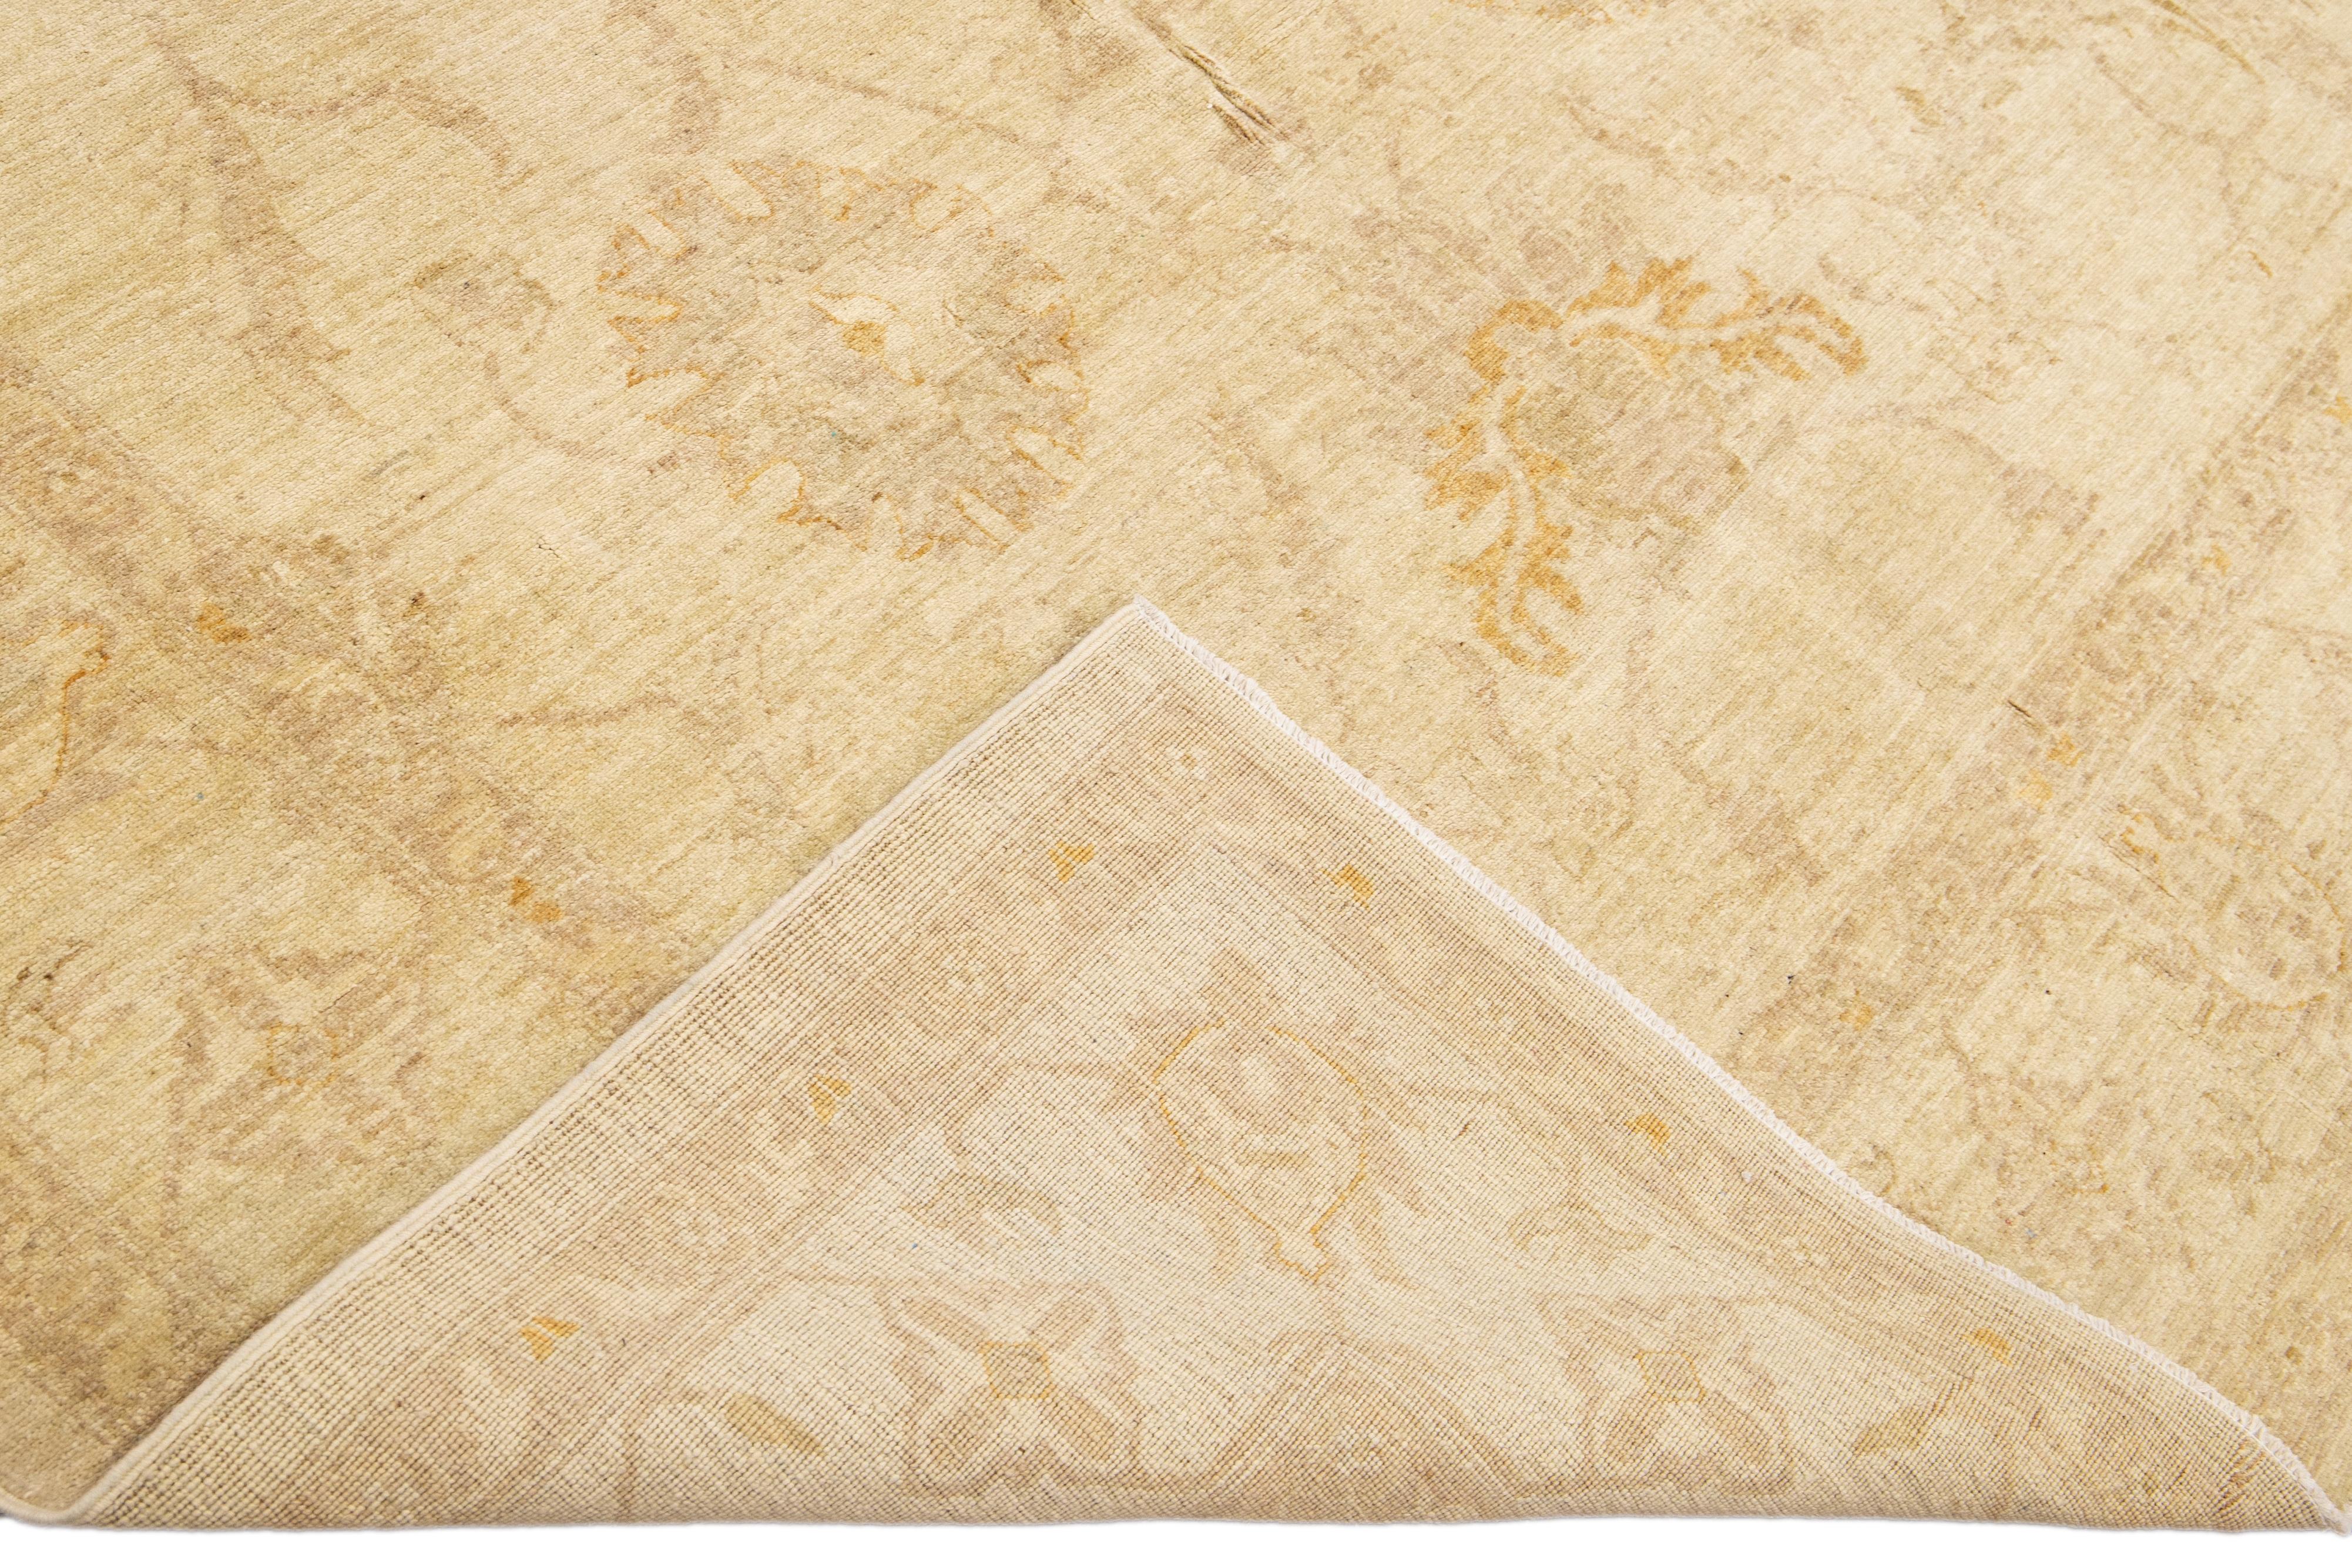 Beautiful modern Oushak hand-knotted wool rug with a beige field. This Oushak rug has brown accents that feature a gorgeous floral pattern design.

This rug measures: 6'10